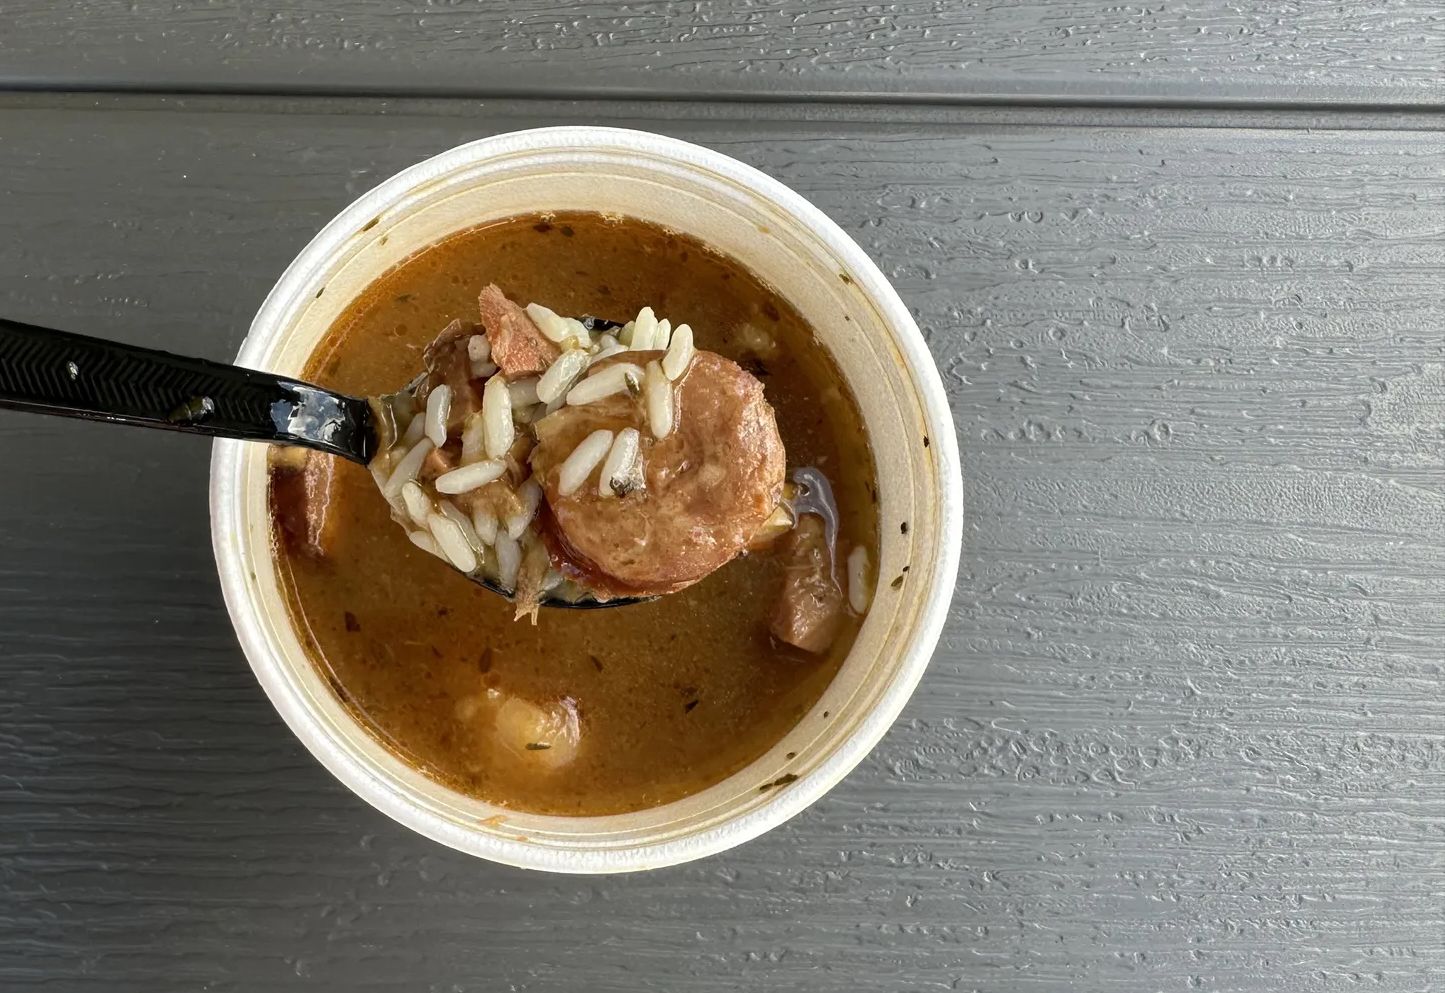 Photo shows a cup of gumbo